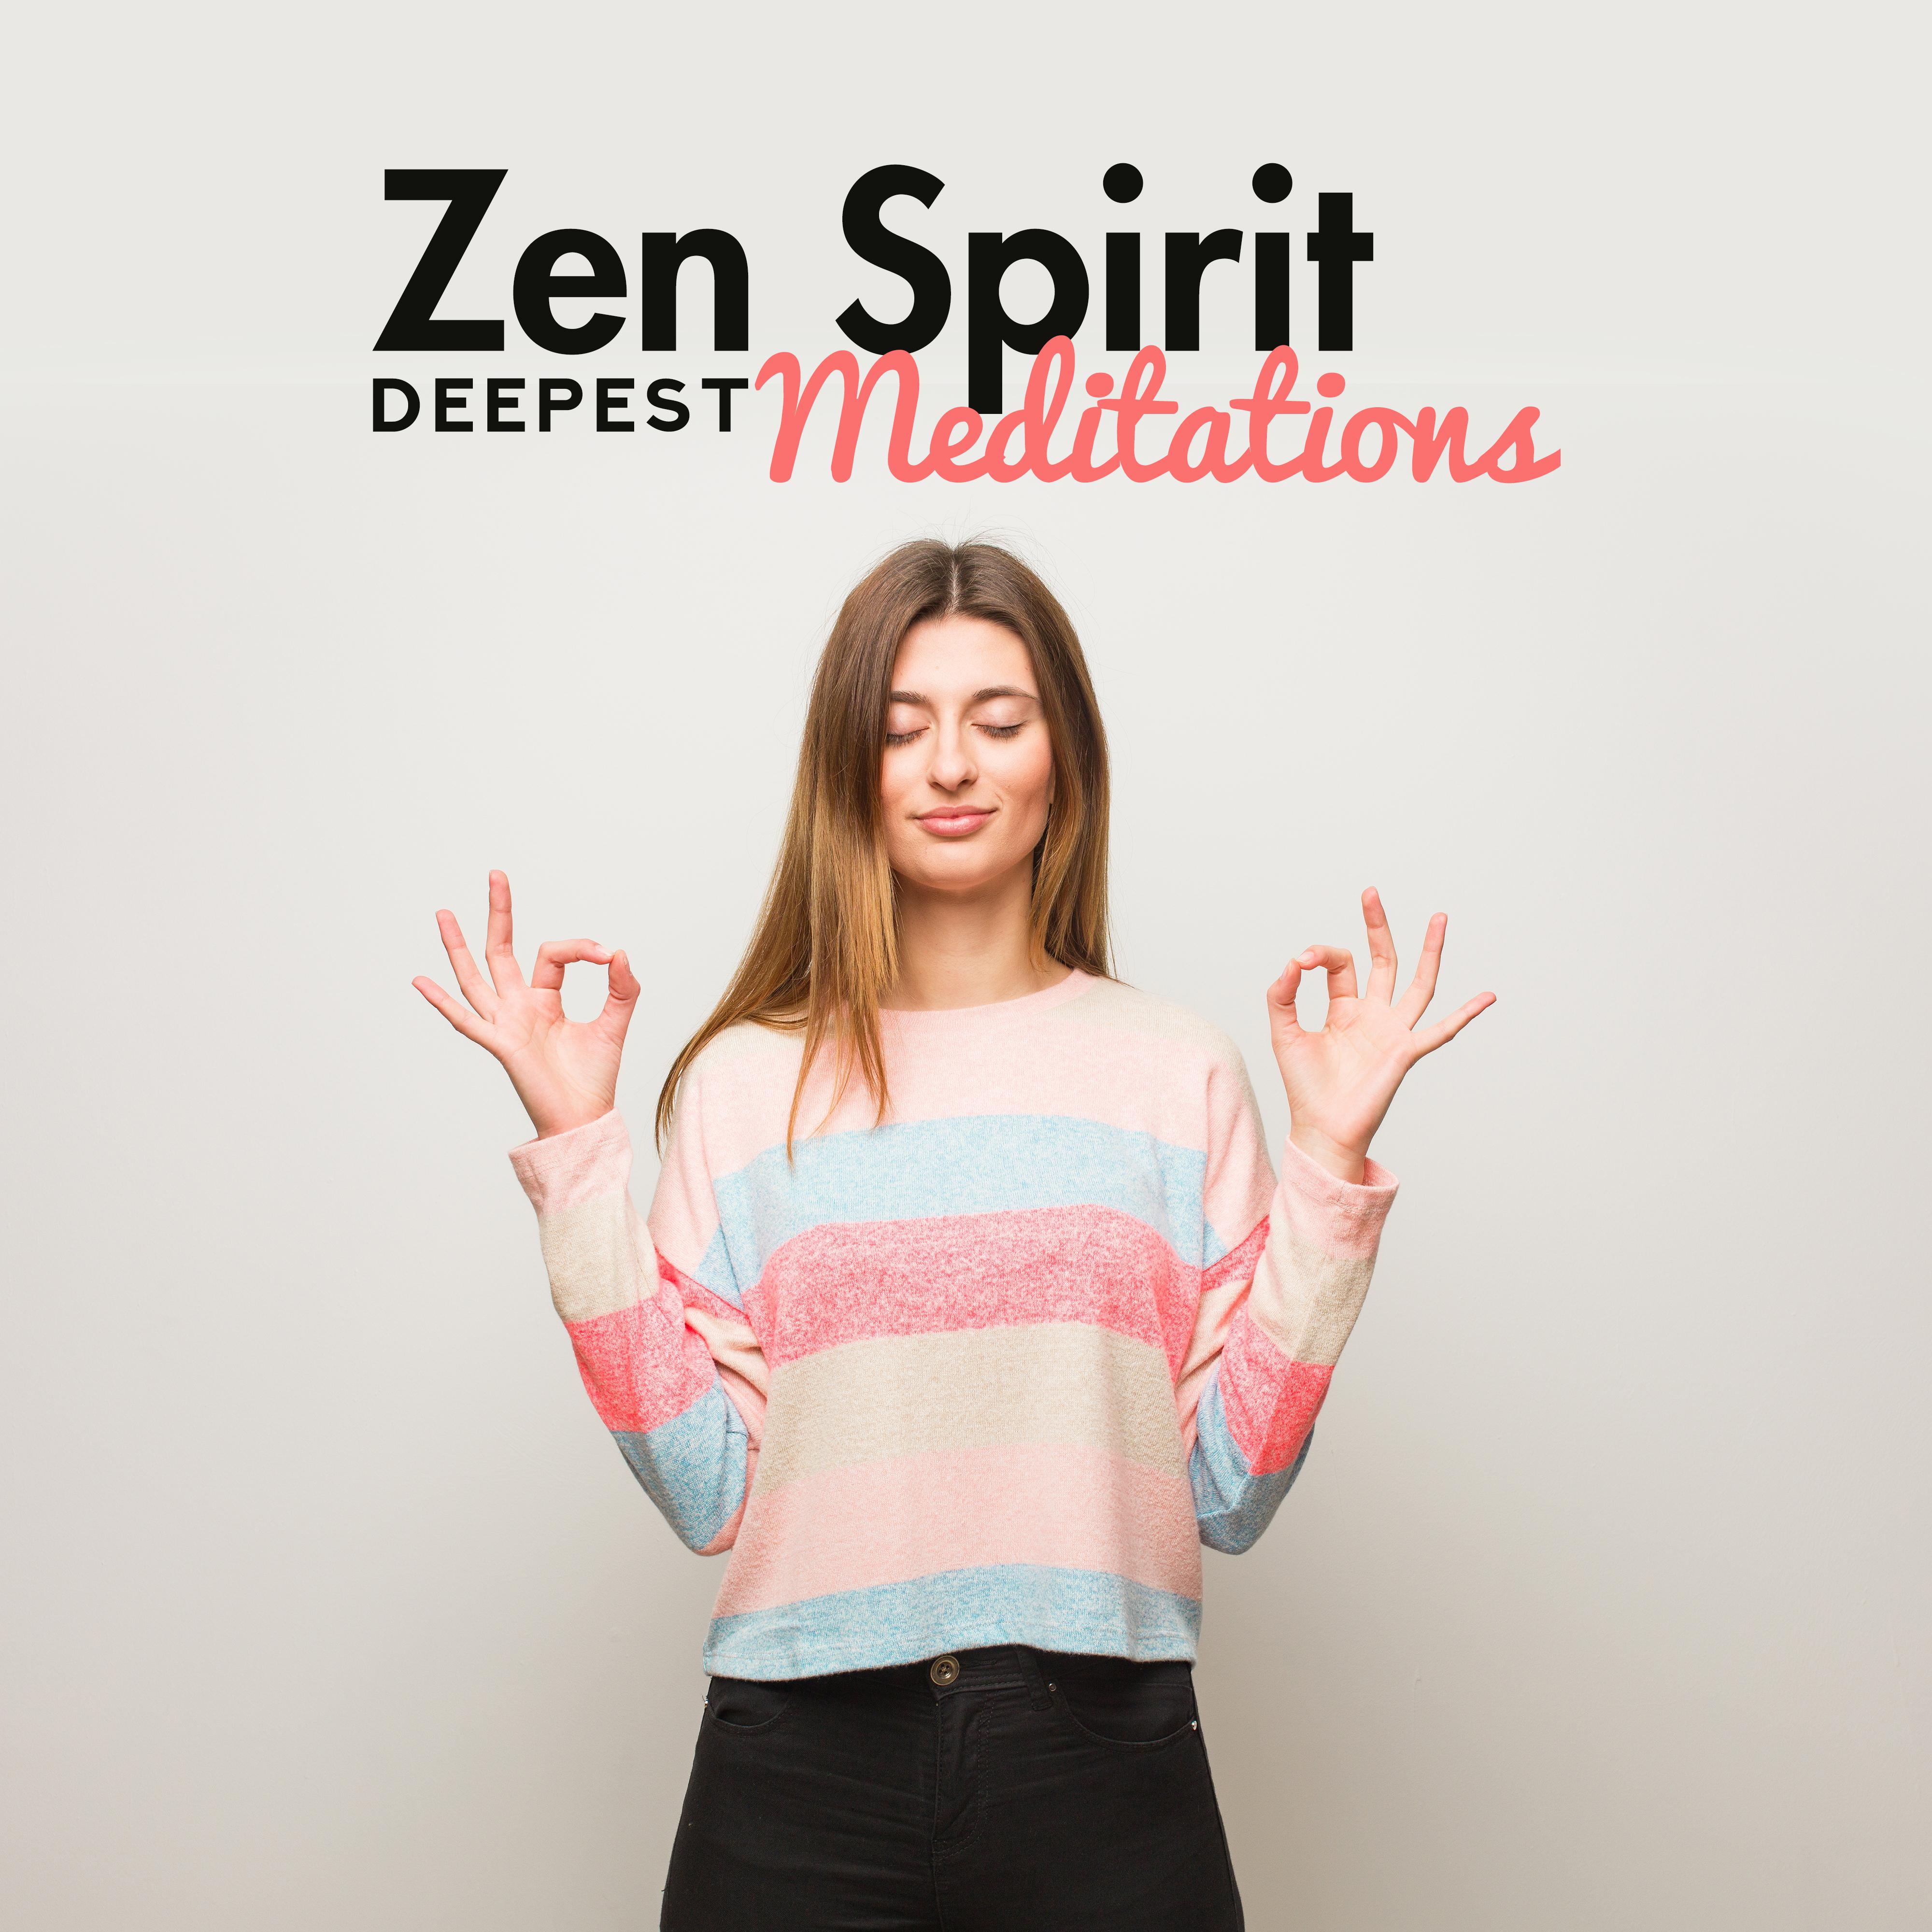 Zen Spirit Deepest Meditations: 2019 New Age Deep Ambient Music Created for Best Yoga Contemplation Experience, Inner Ballance, Chakra Healing, Life Energy Improve